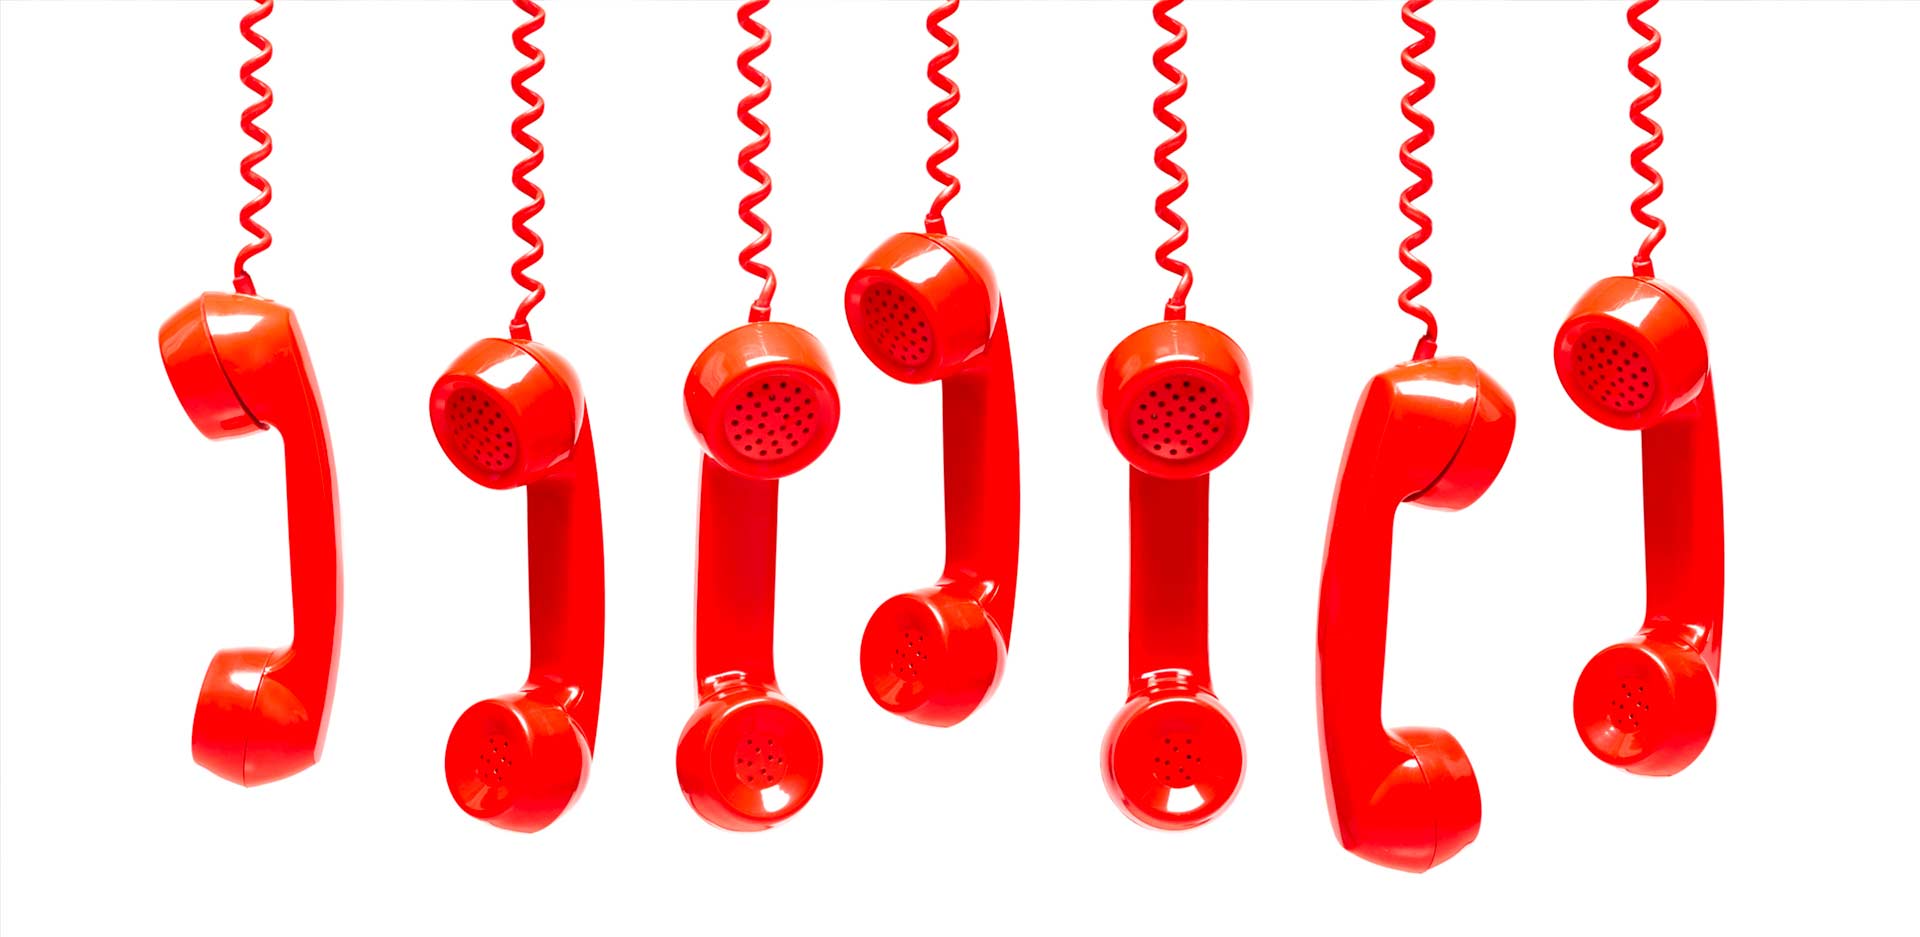 Old-fashioned red telephone handsets representing busy COVID-19 hotlines.